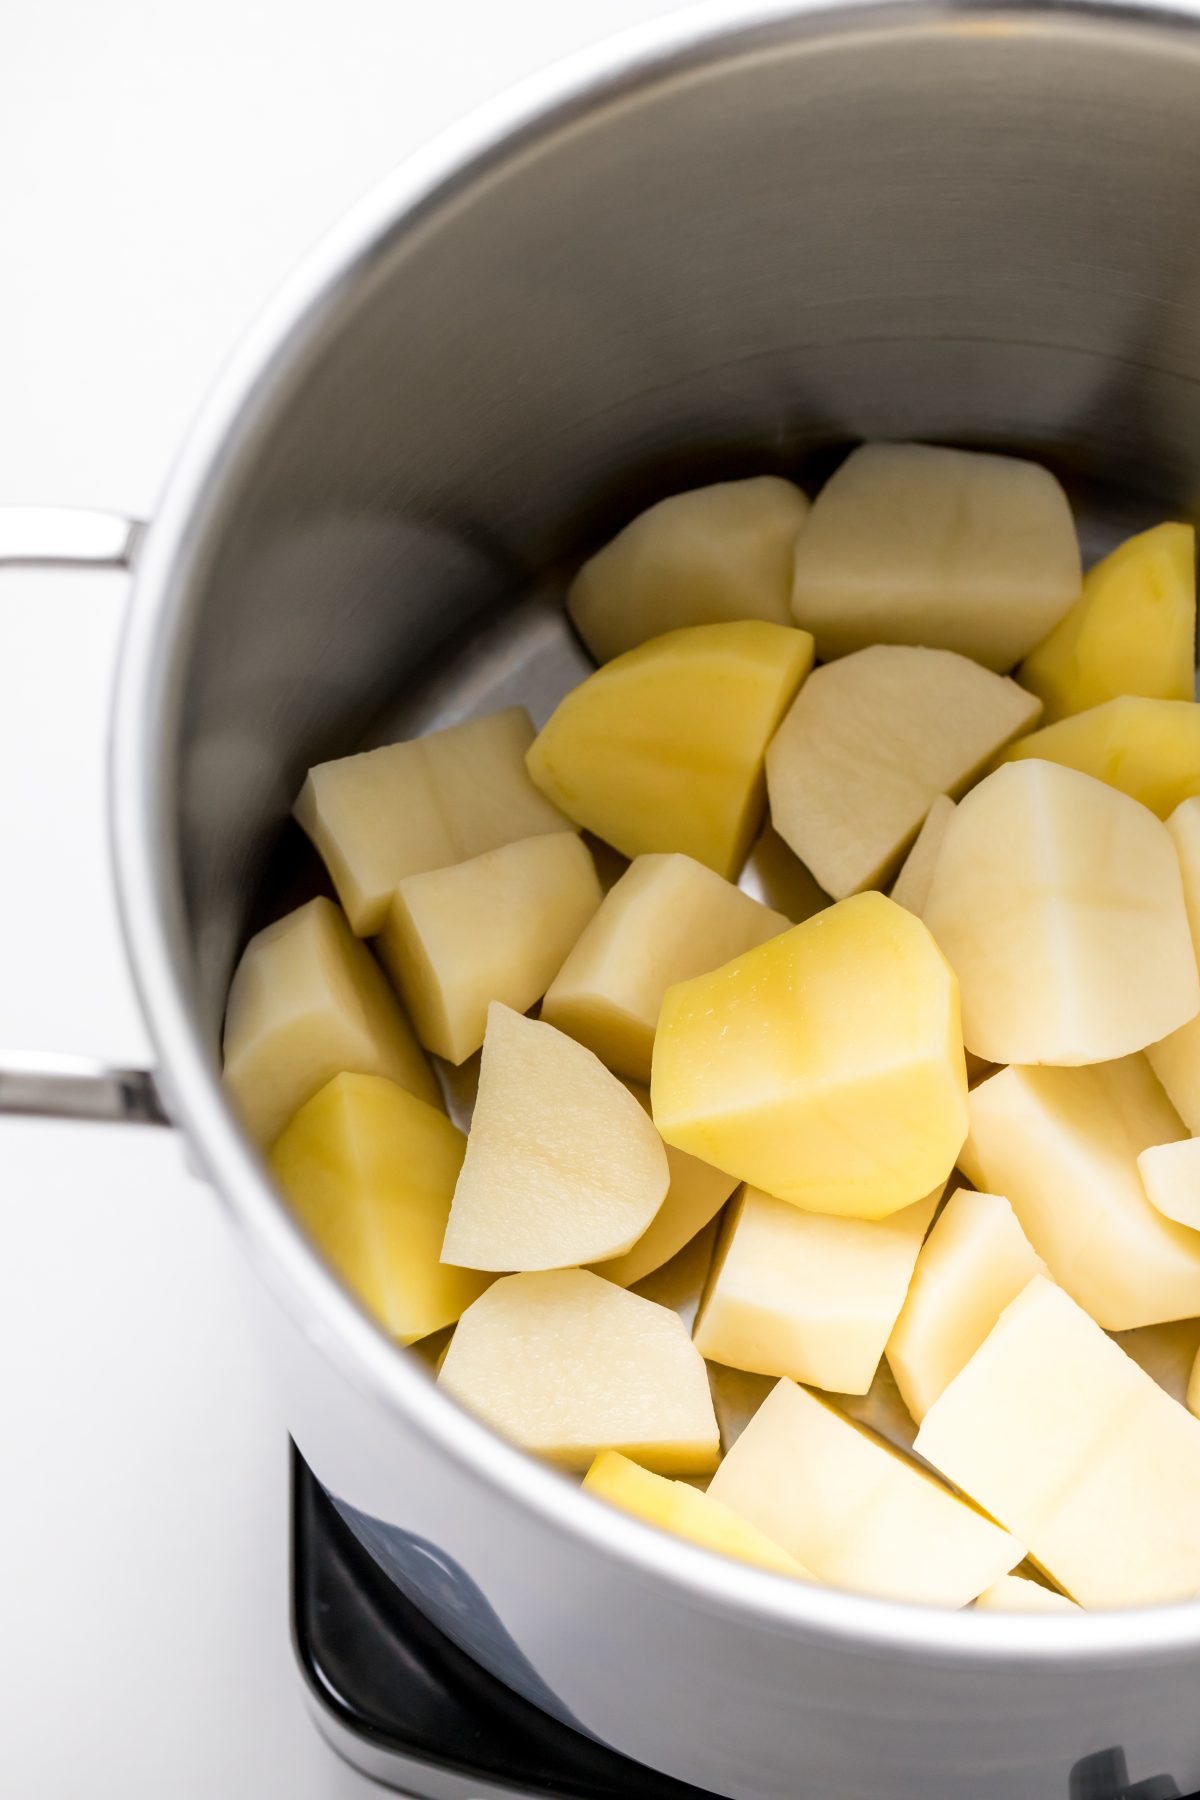 Place potato and celery root chunks and the creamy horseradish in a large stockpot